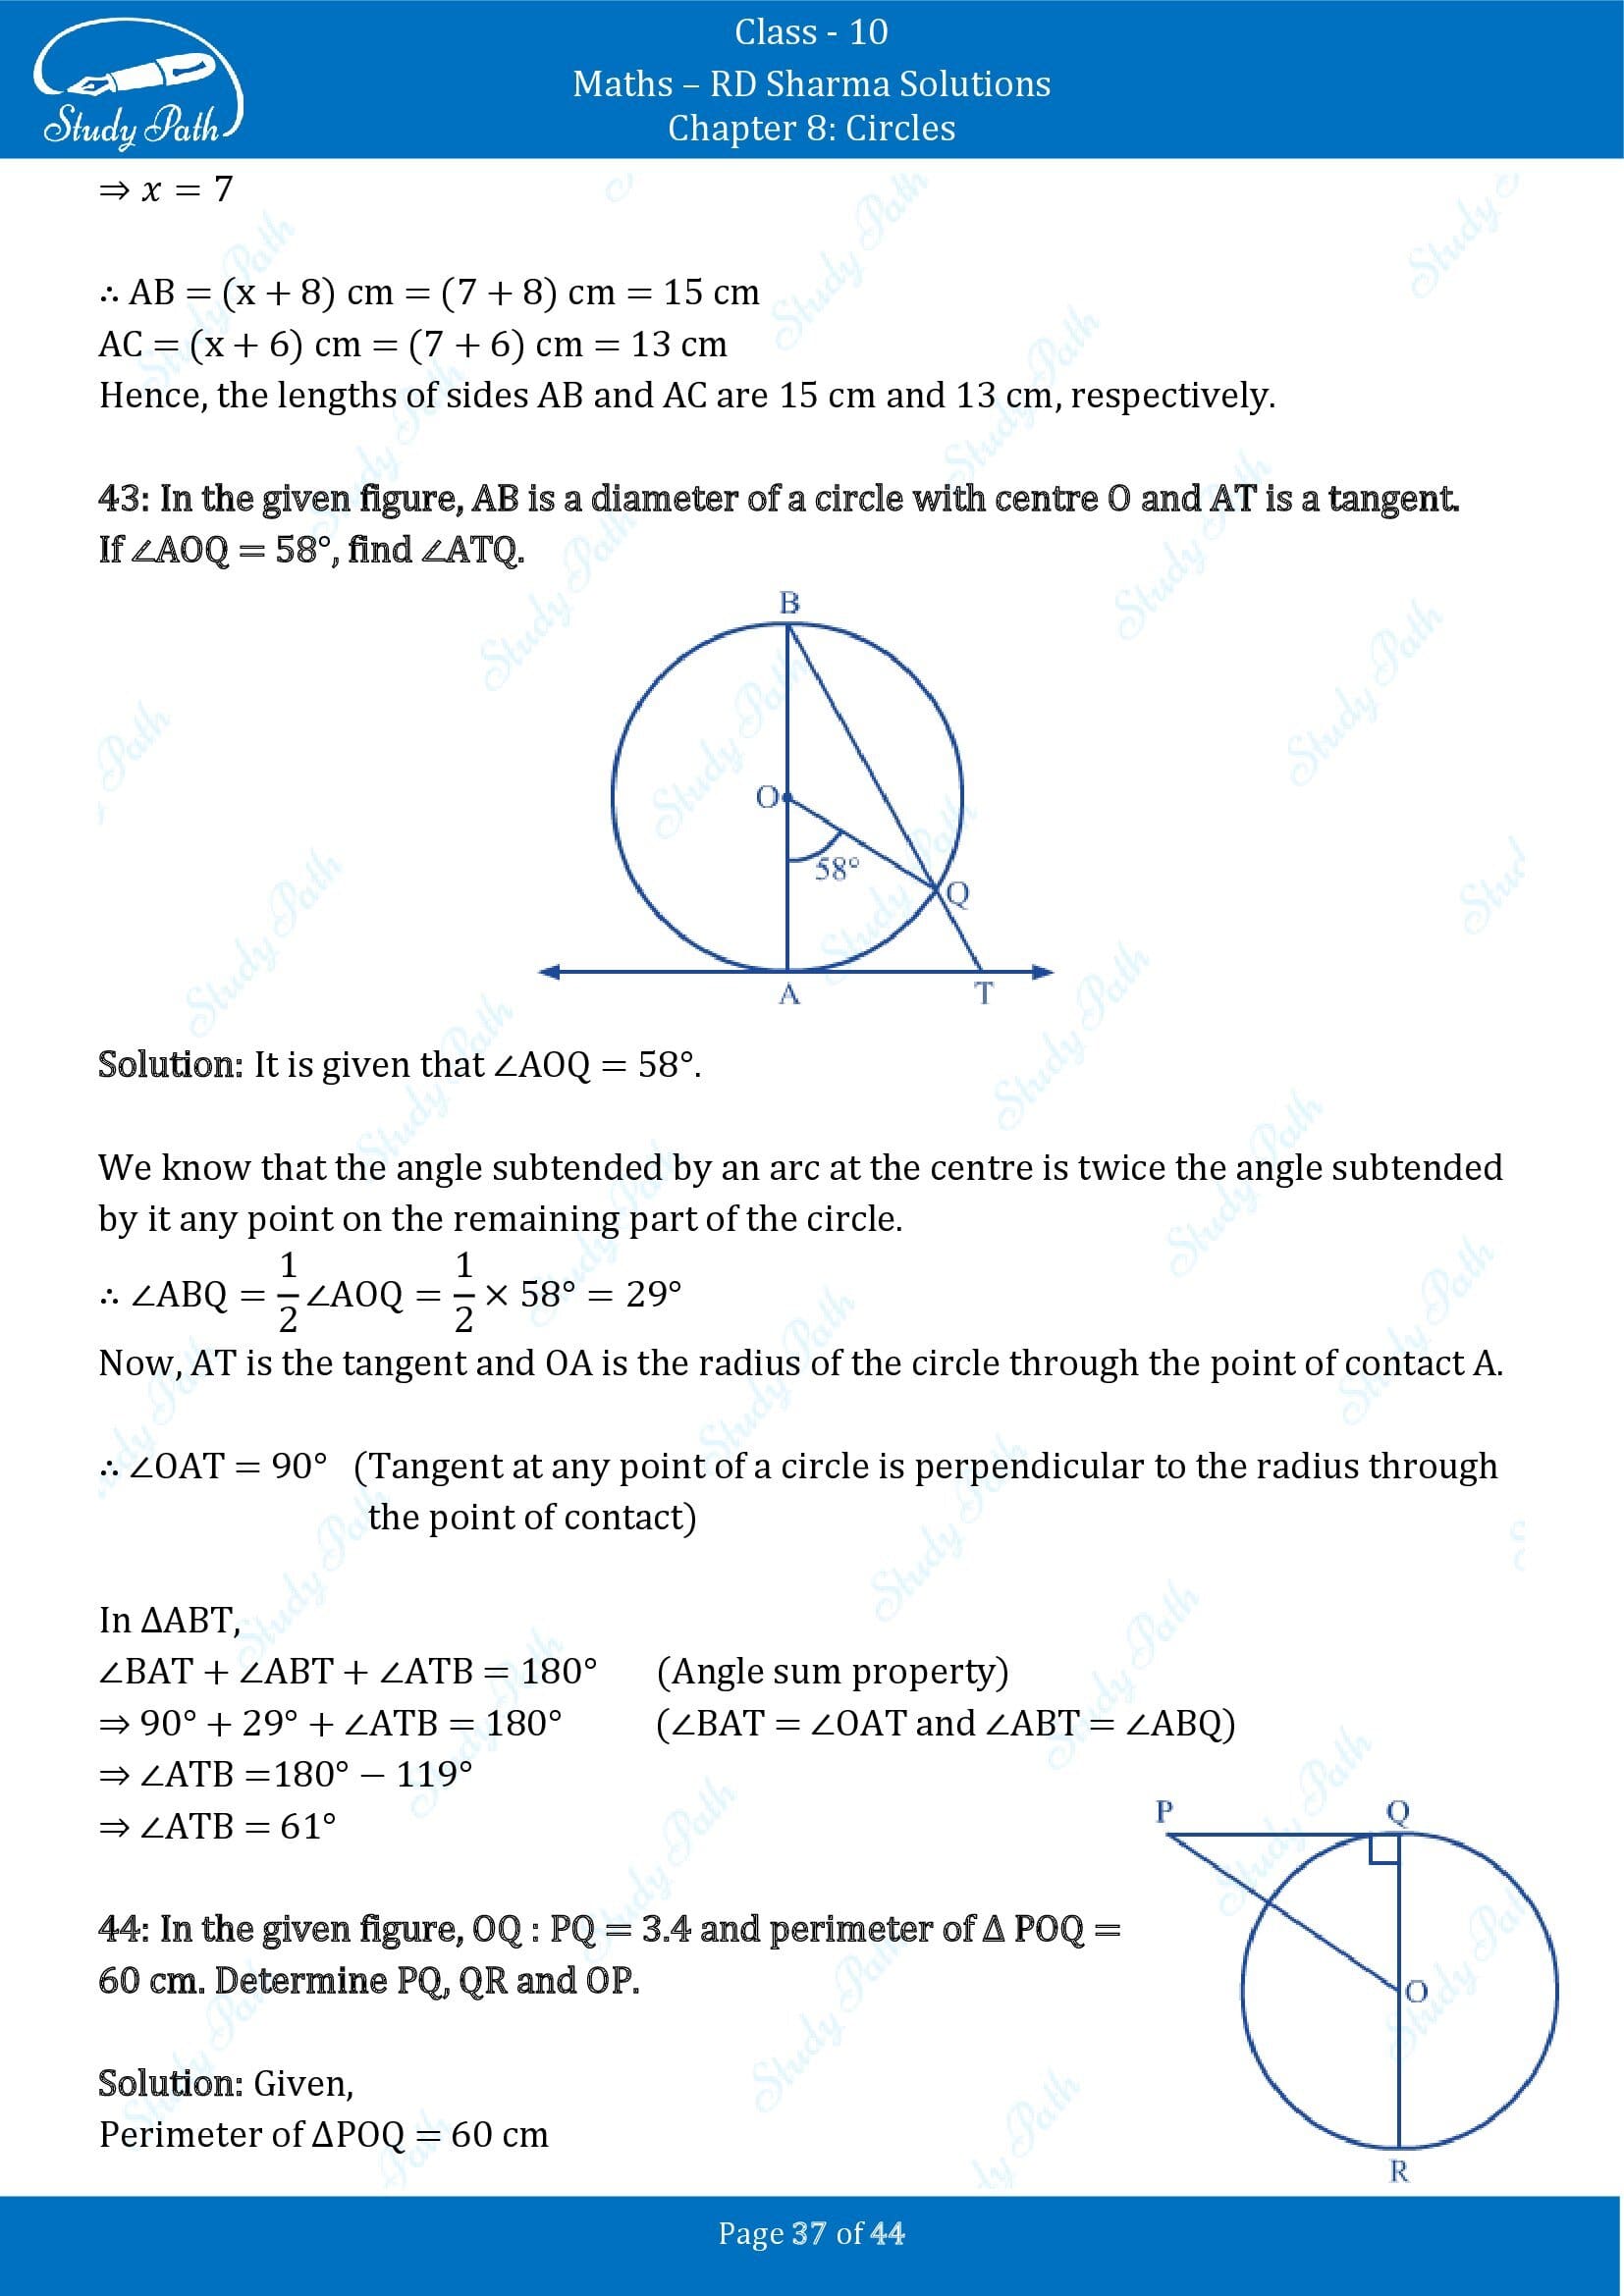 RD Sharma Solutions Class 10 Chapter 8 Circles Exercise 8.2 00037